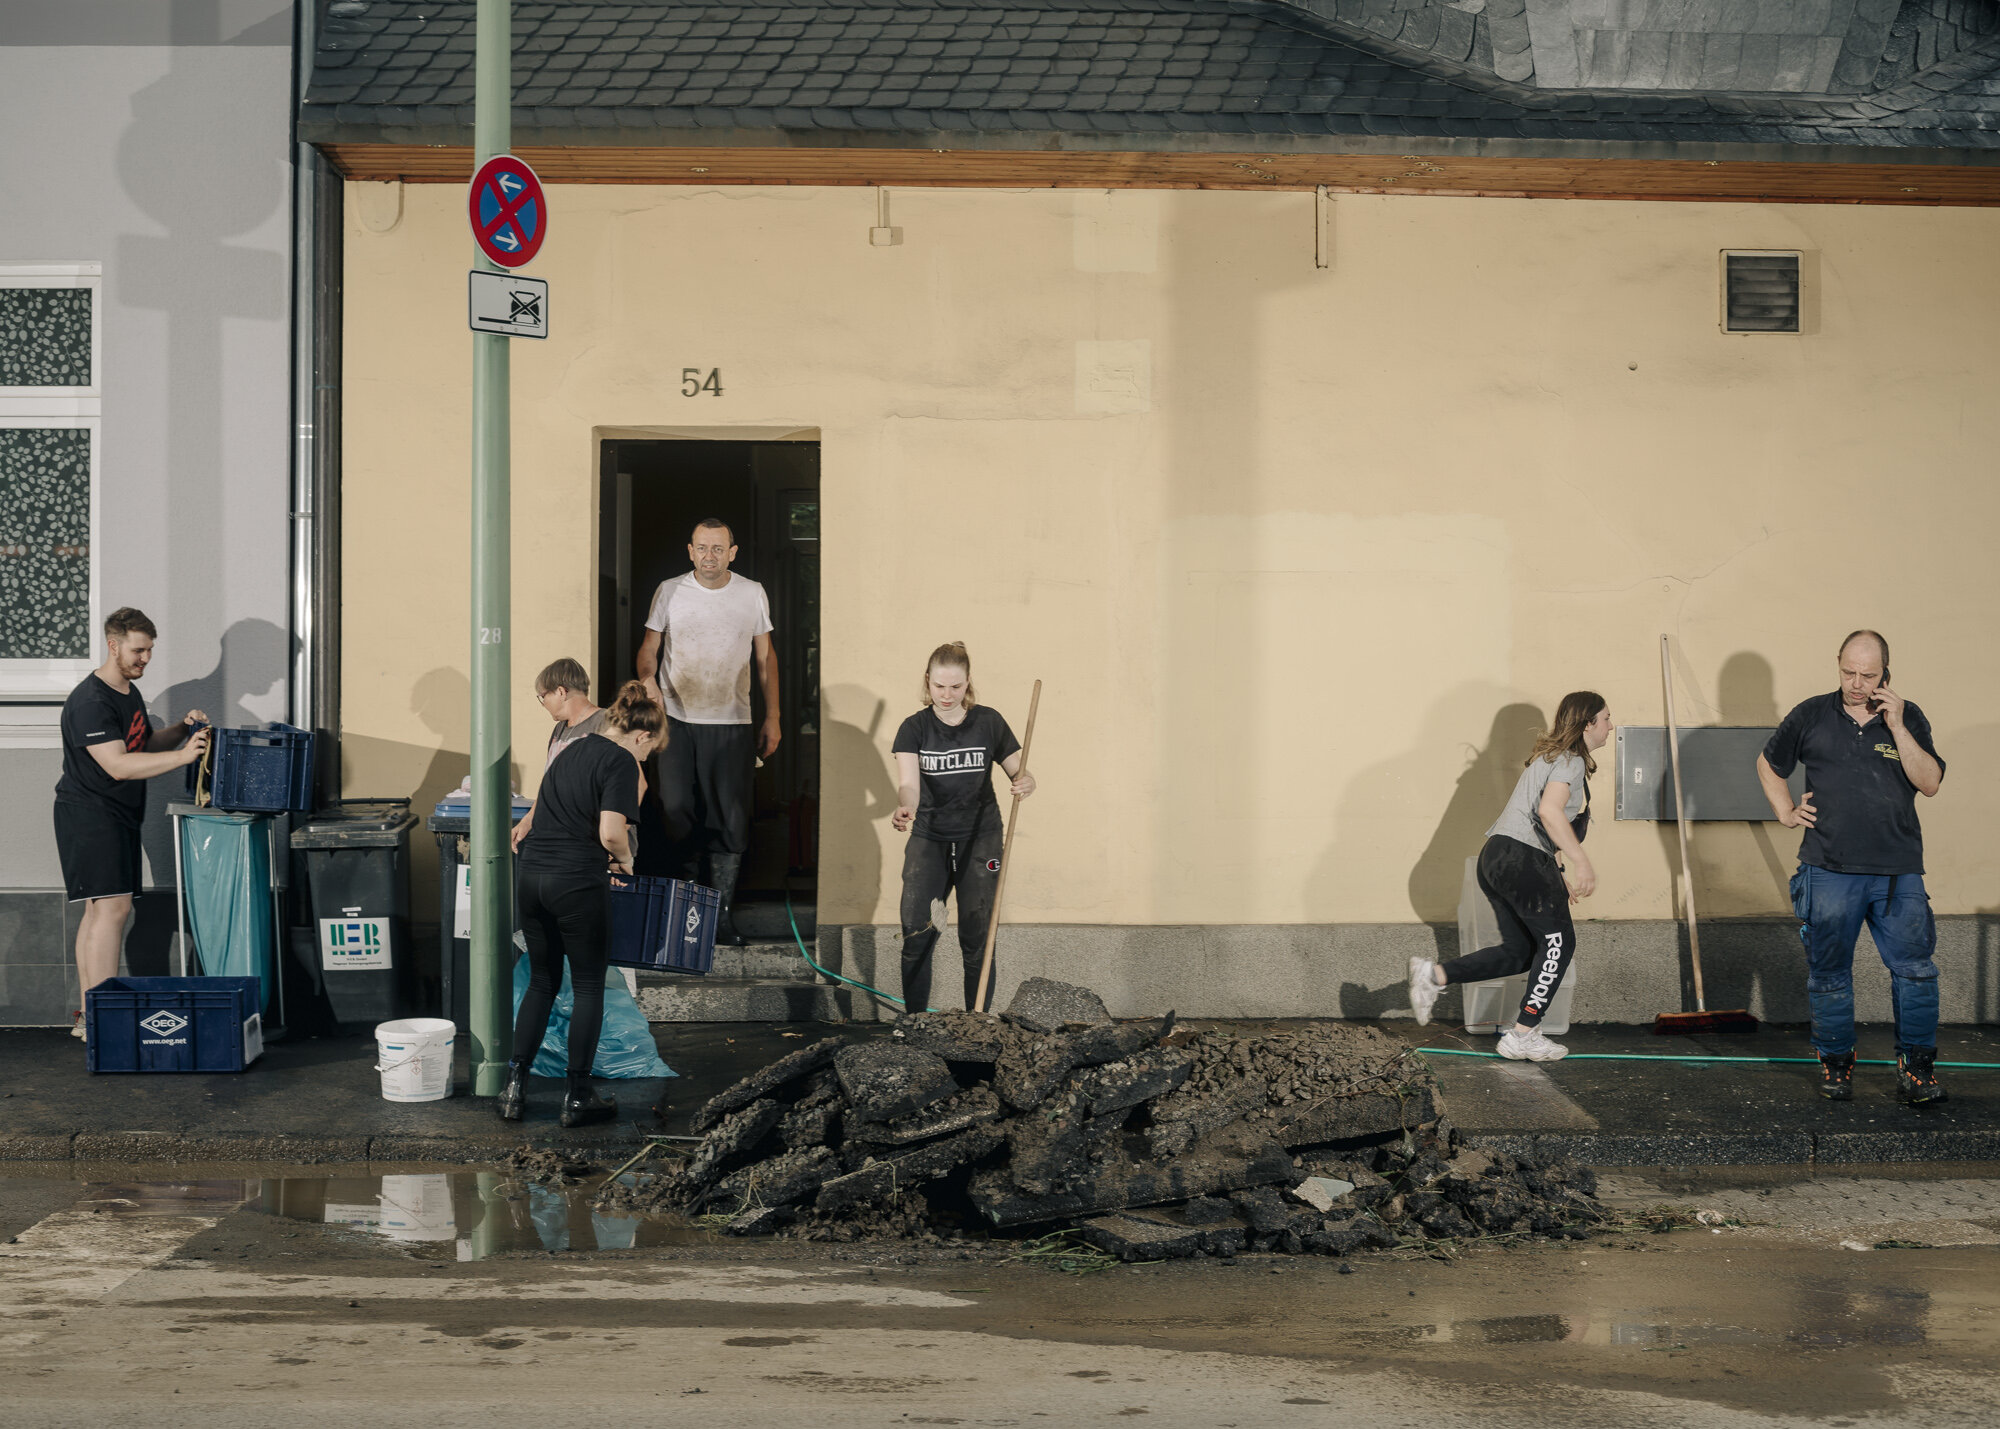  Clean-up in Hagen after the flood in West Germany 